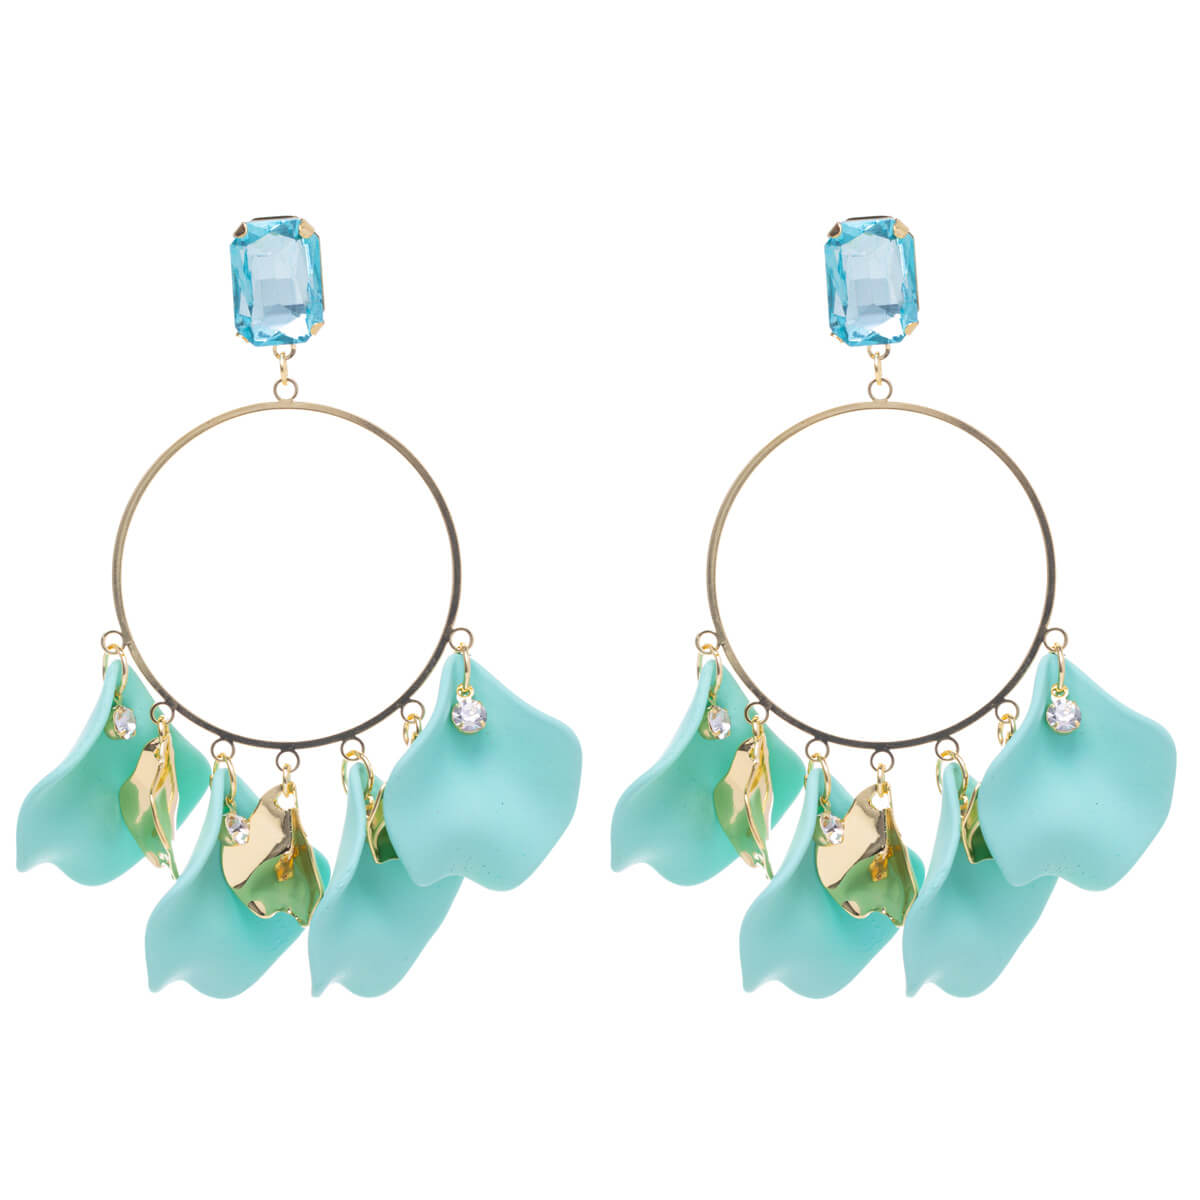 Big round earrings with hanging decorations